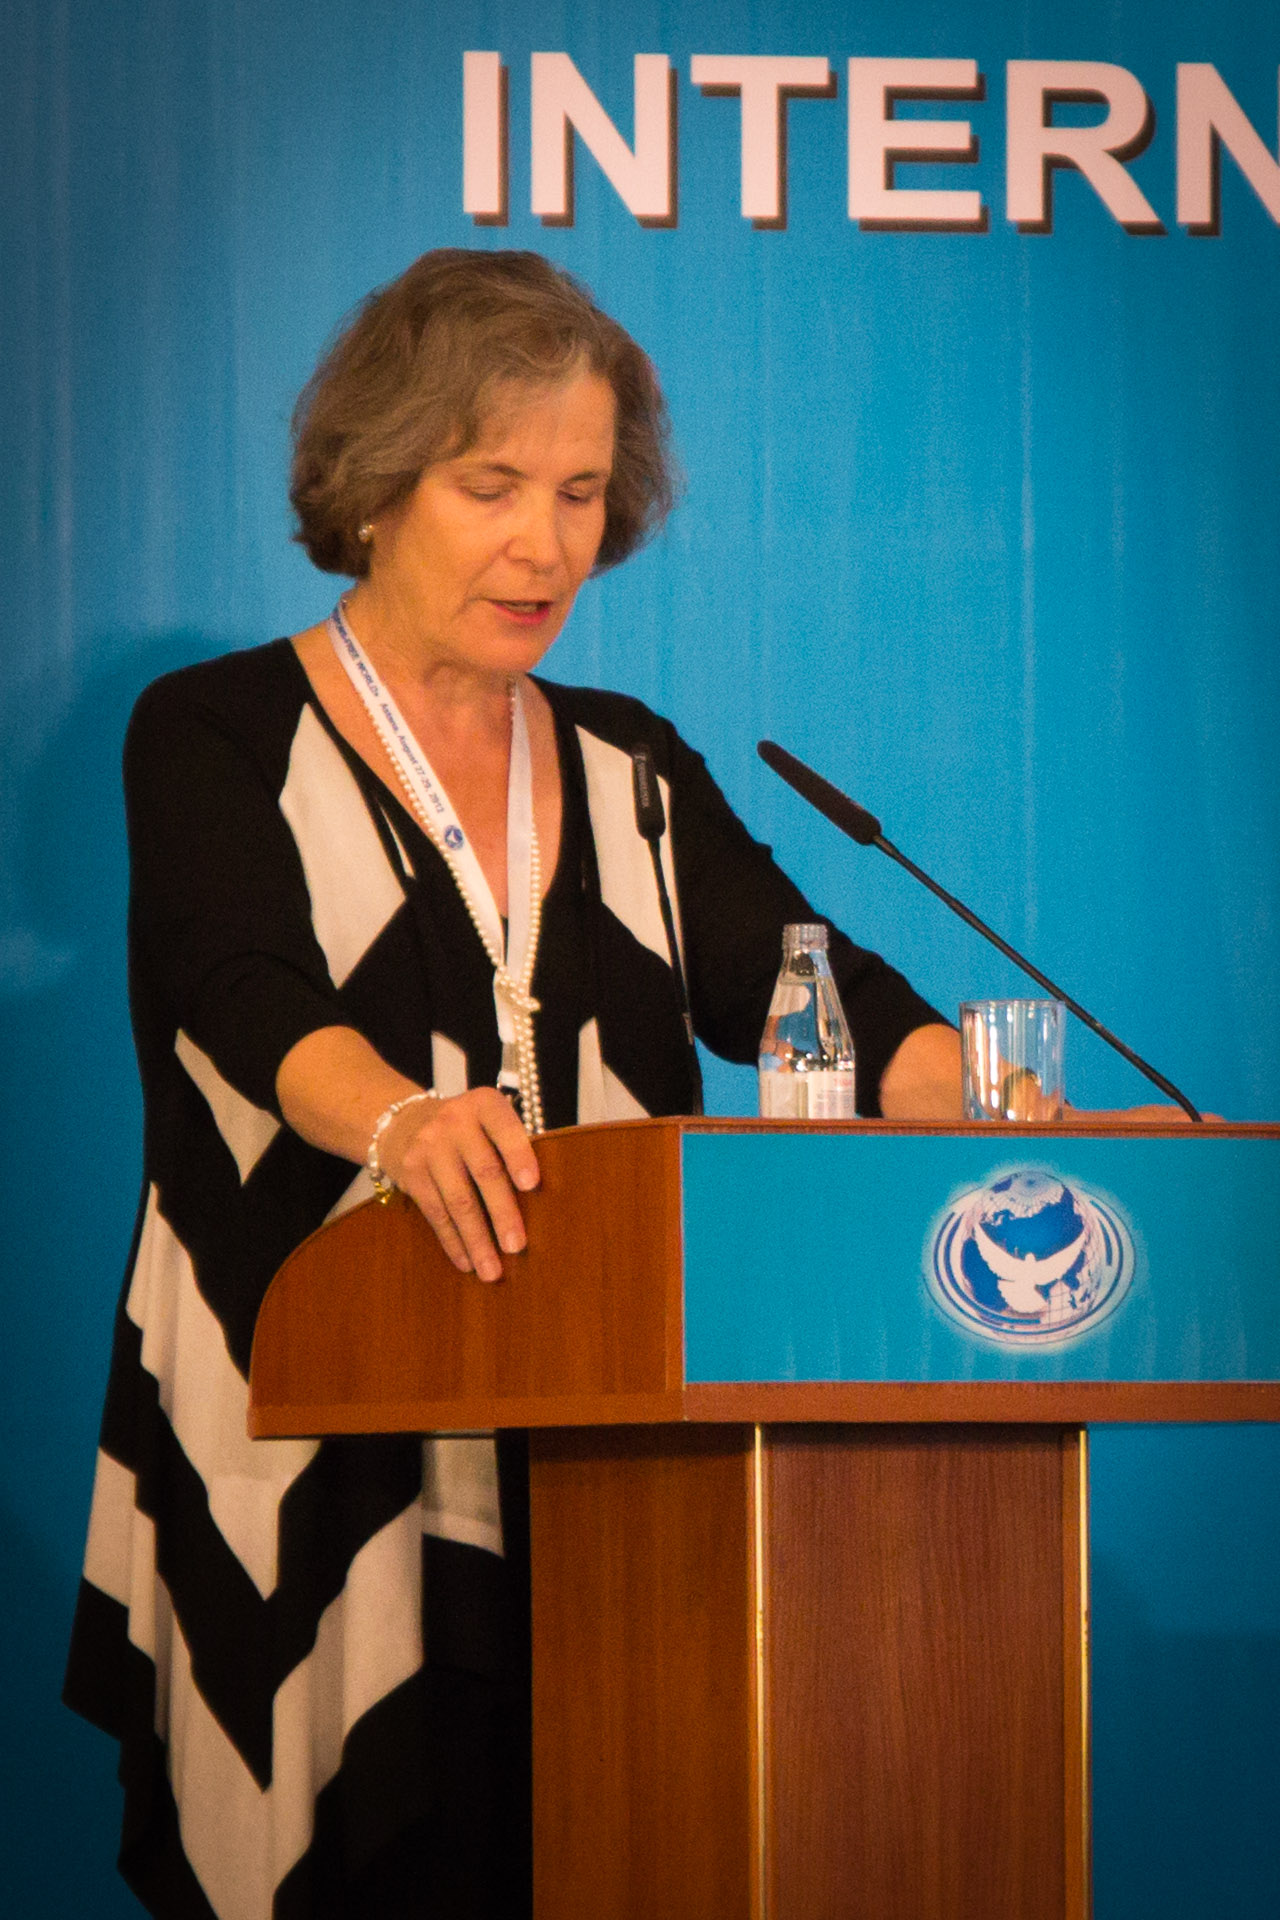 Christine Beerli, Vice-president of the International Committee of Red Cross